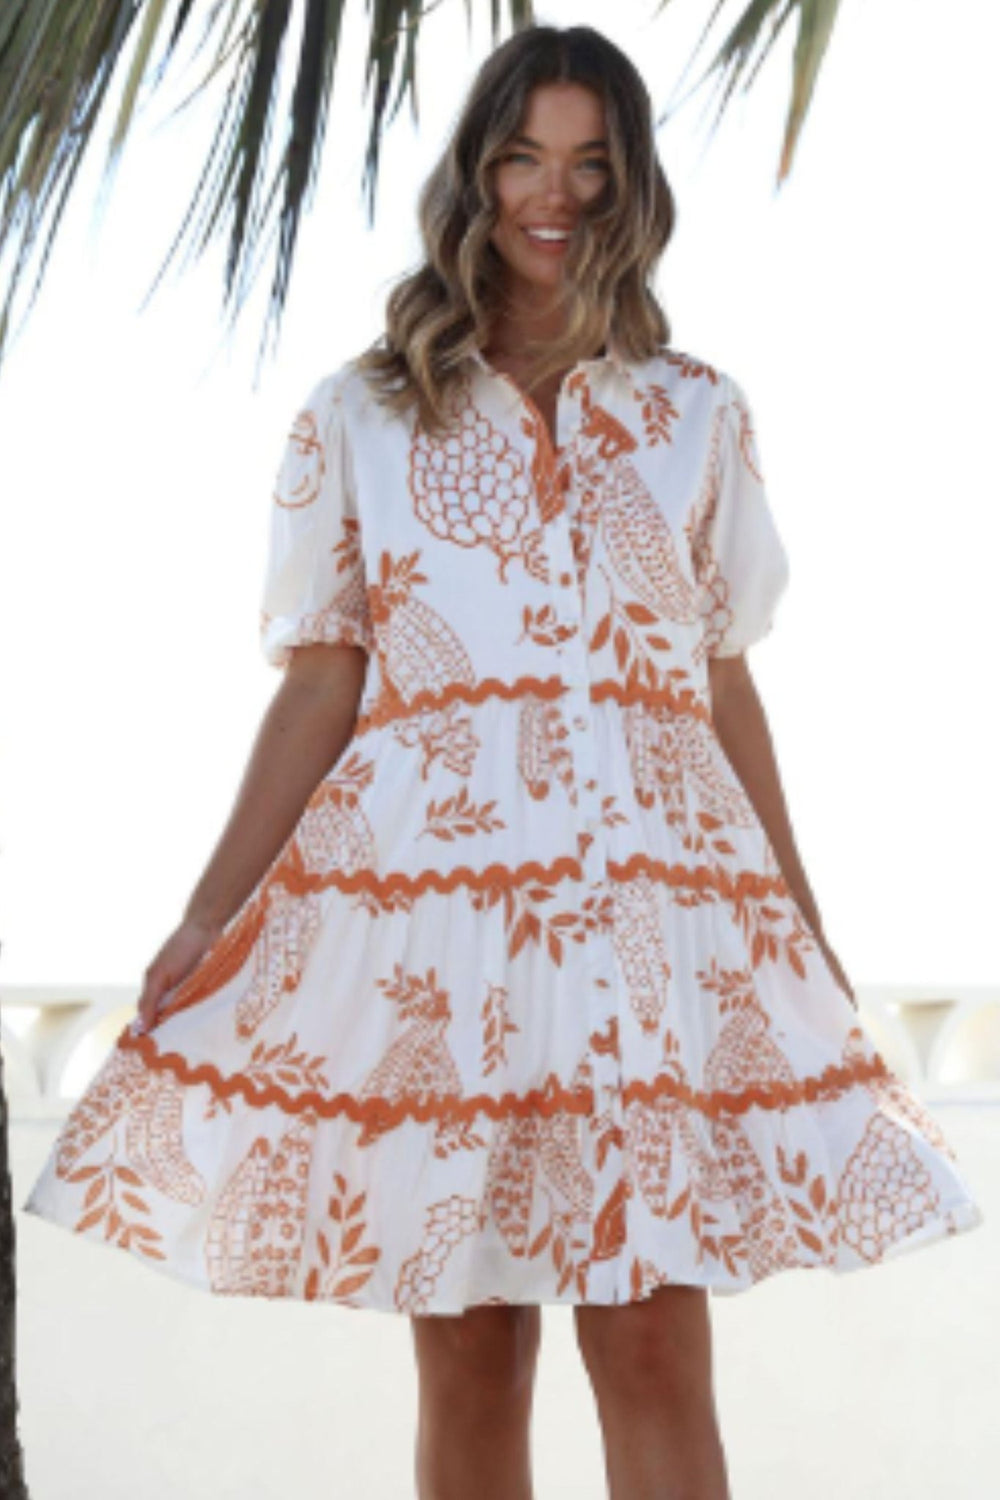 Ric Rac Print Dress in white - Since I Found You